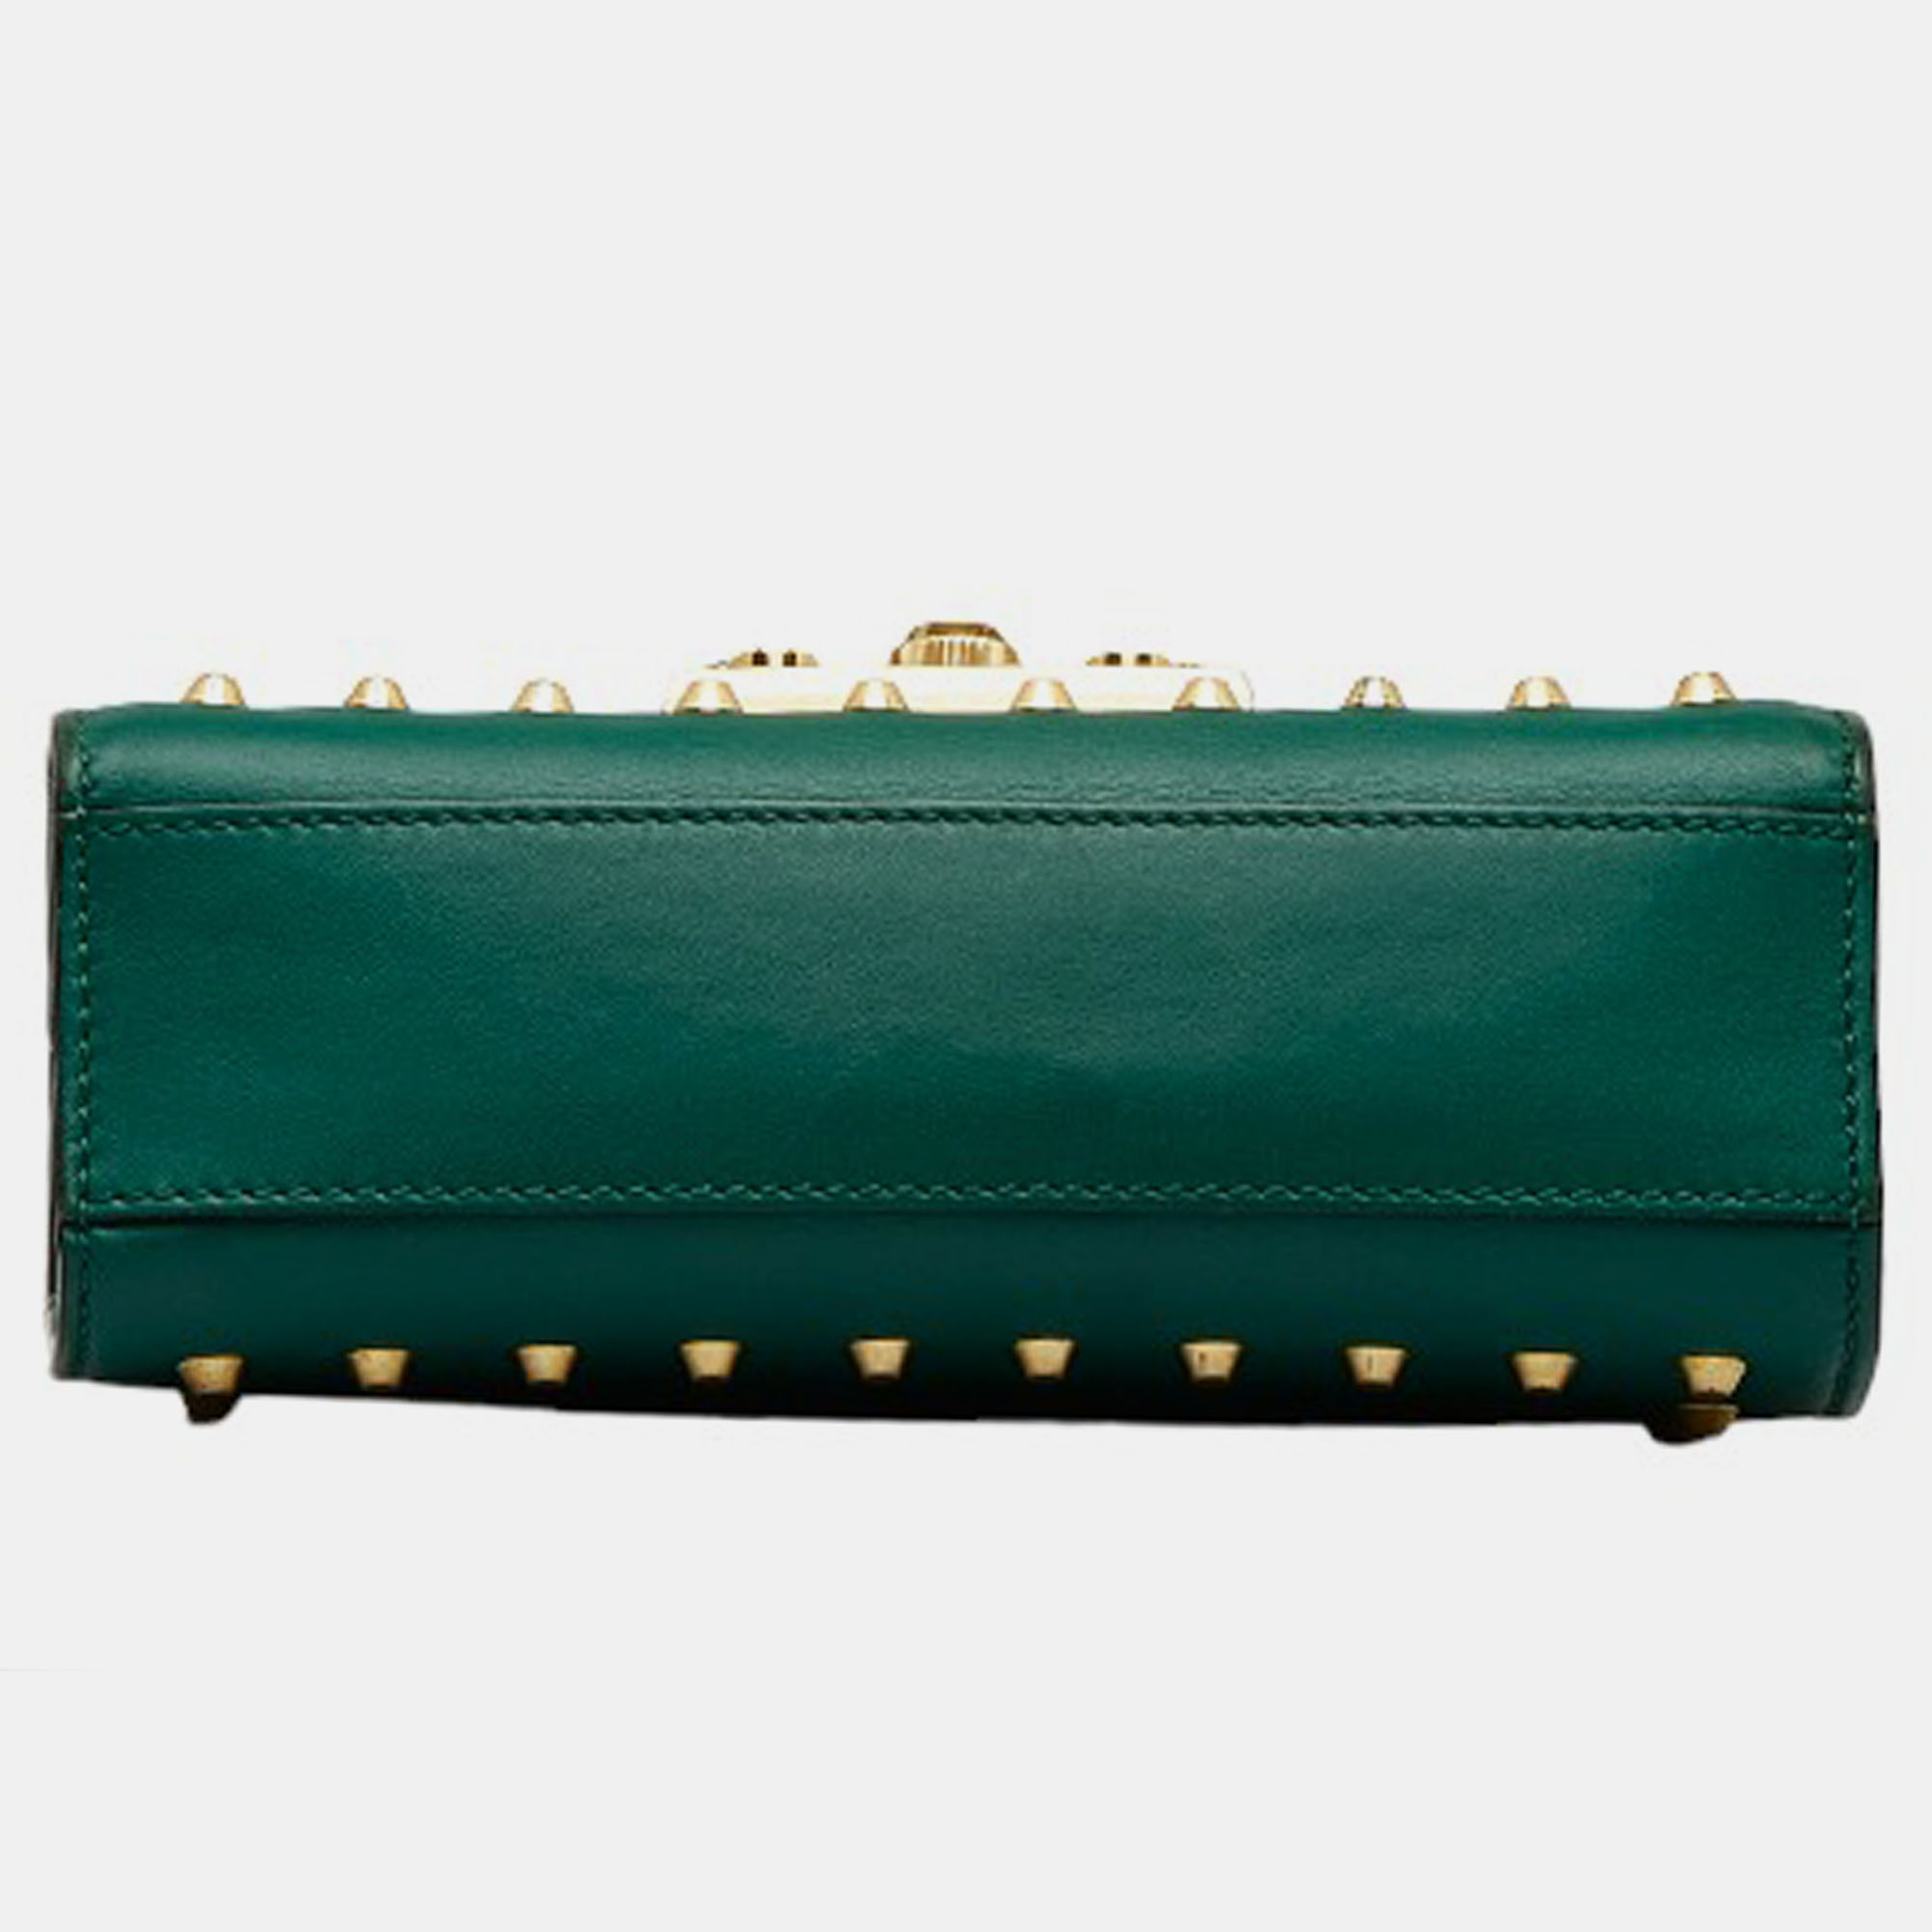 Gucci Green Studded Leather Small Padlock Shoulder Bag